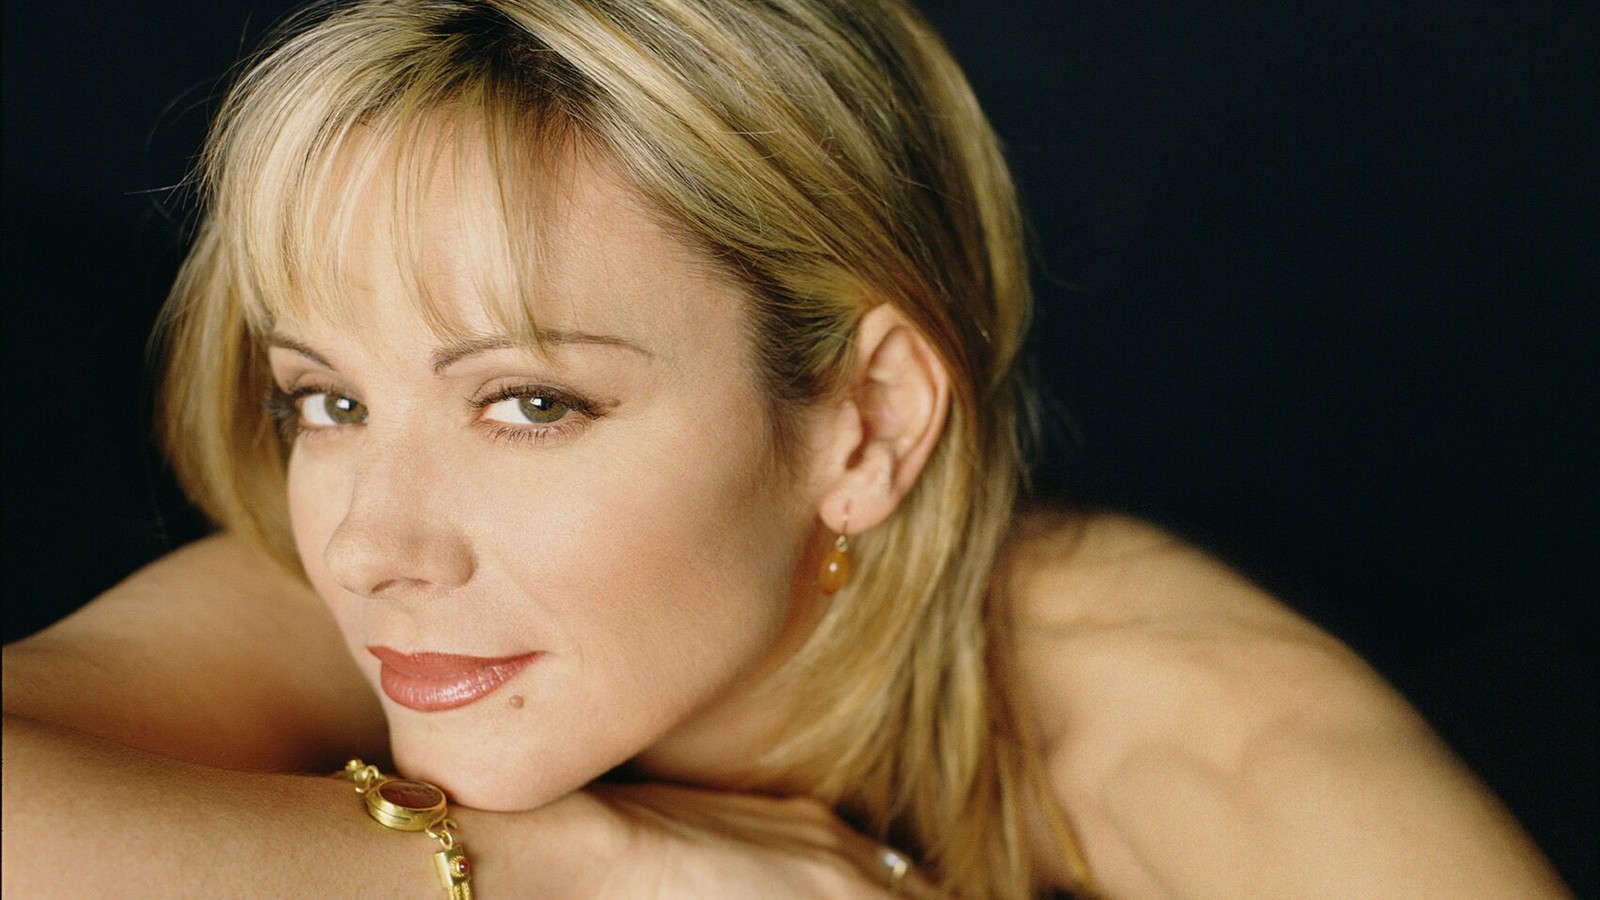 Actress Samantha Porn Videos - The Real 'Sex and the City' Star Was Samantha Jones - The Atlantic